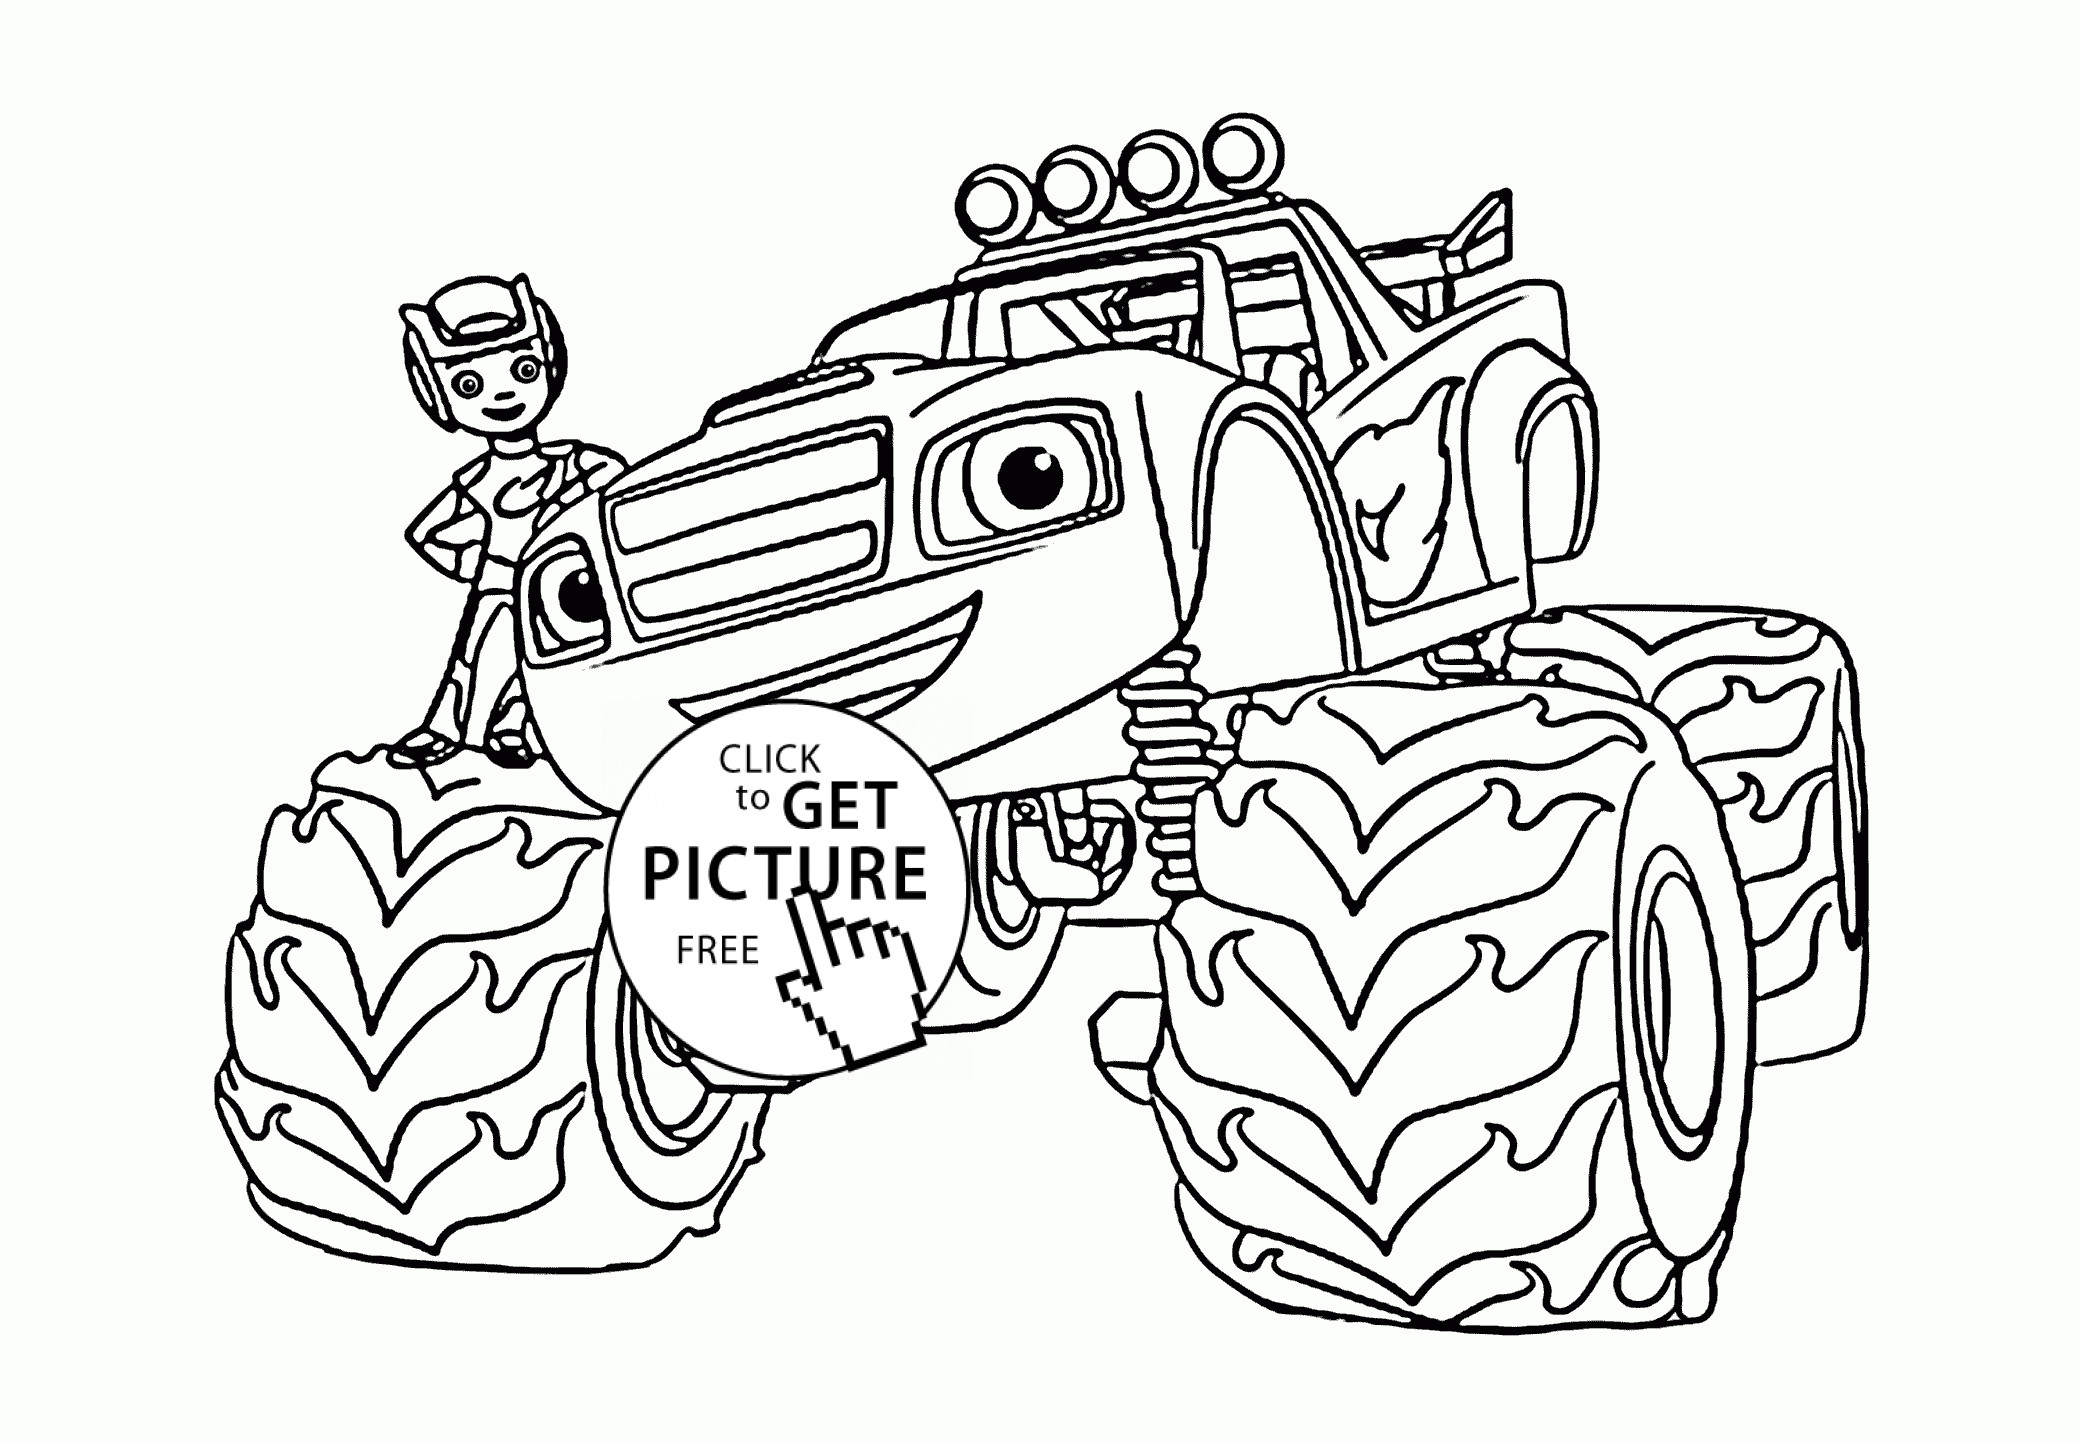 Free Printable Coloring Pages For Boys
 Blaze Monster Truck with Boy coloring page for kids